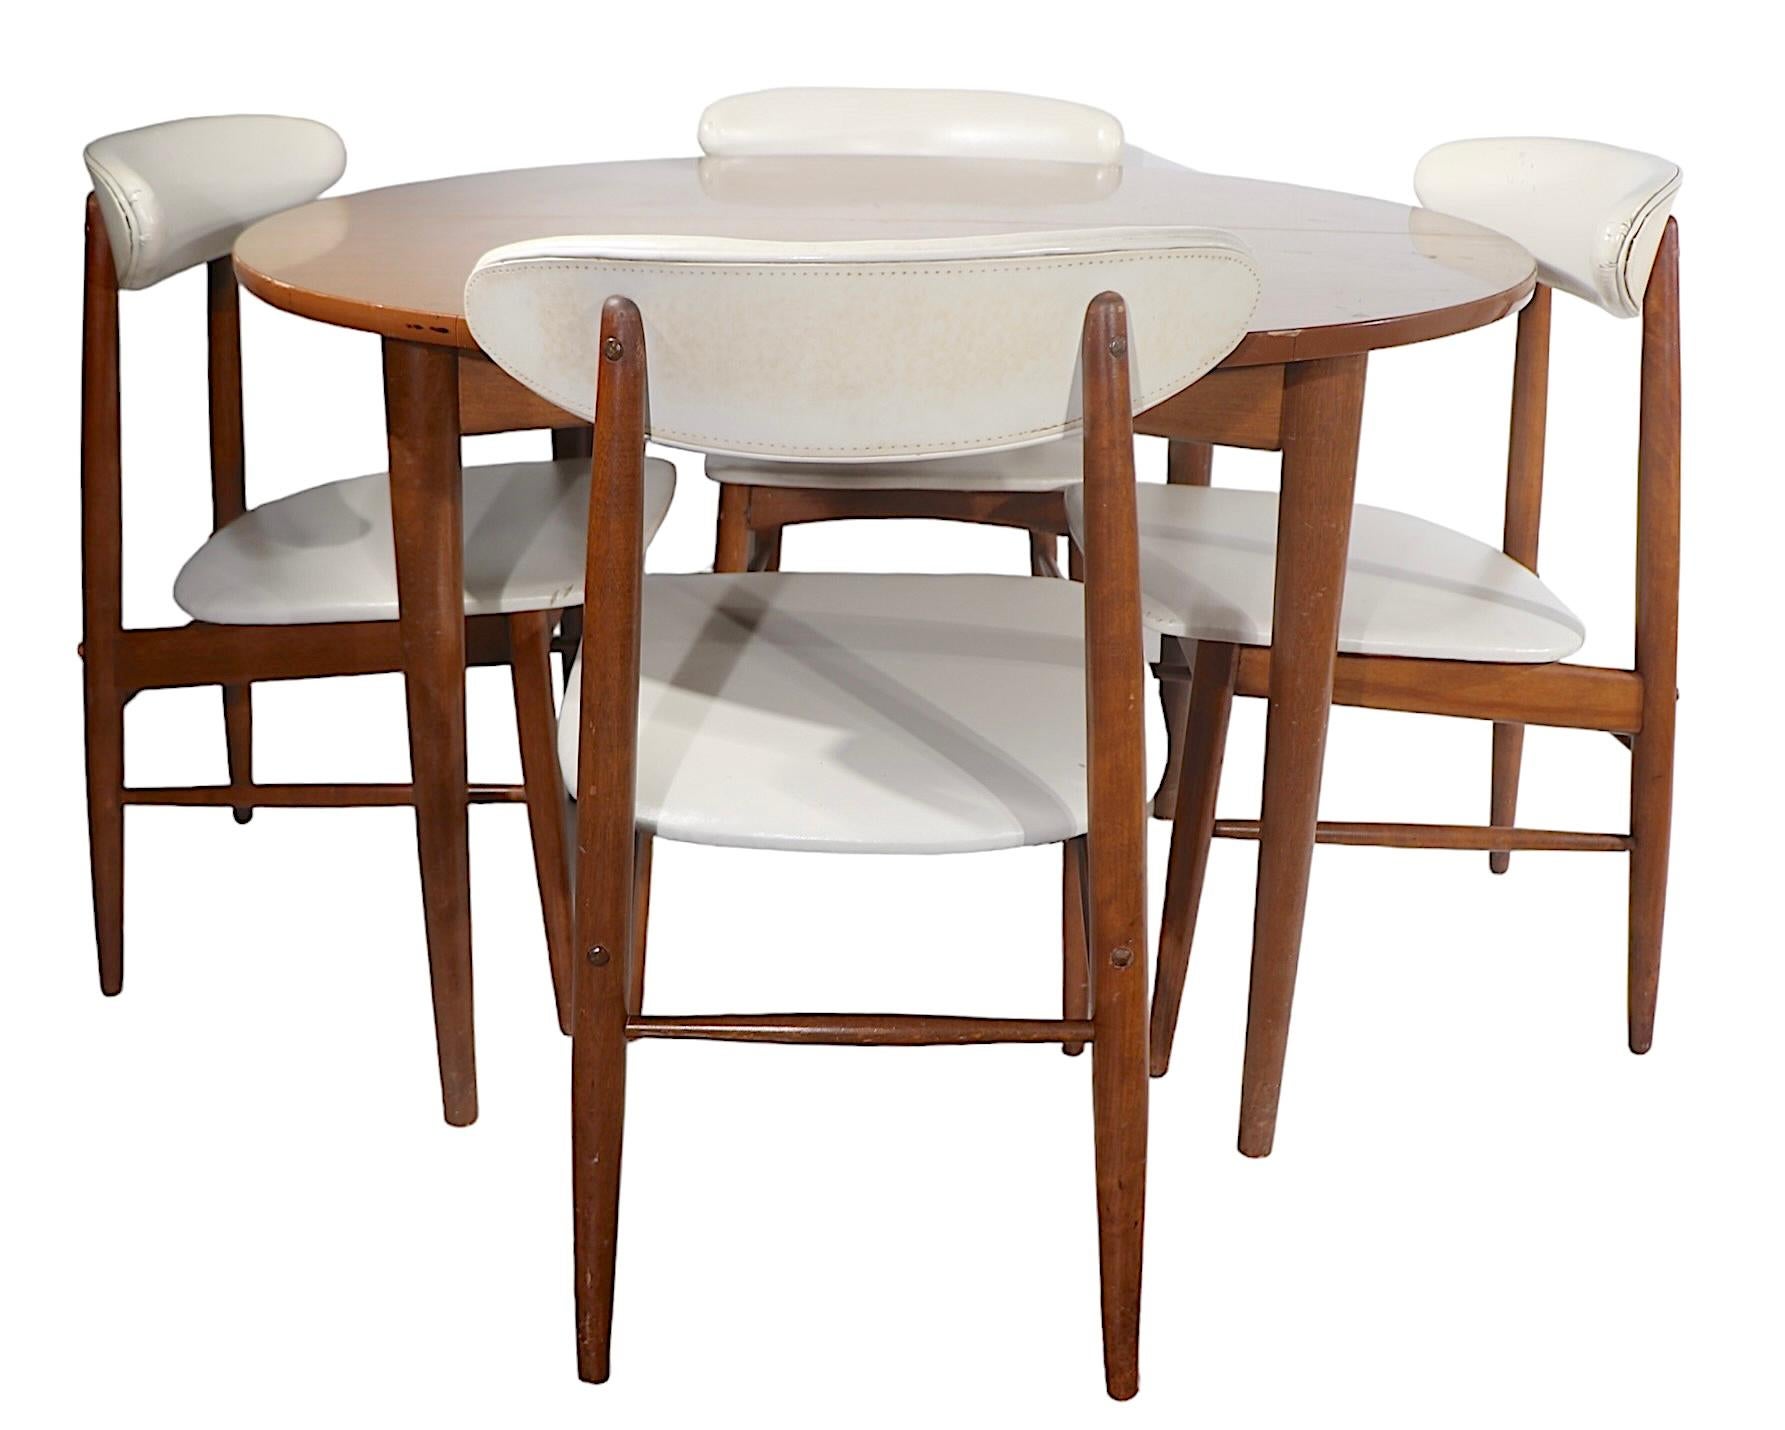 5 pc Mid Century Dinette Set by Viko Baumritter c 1950’s For Sale 2